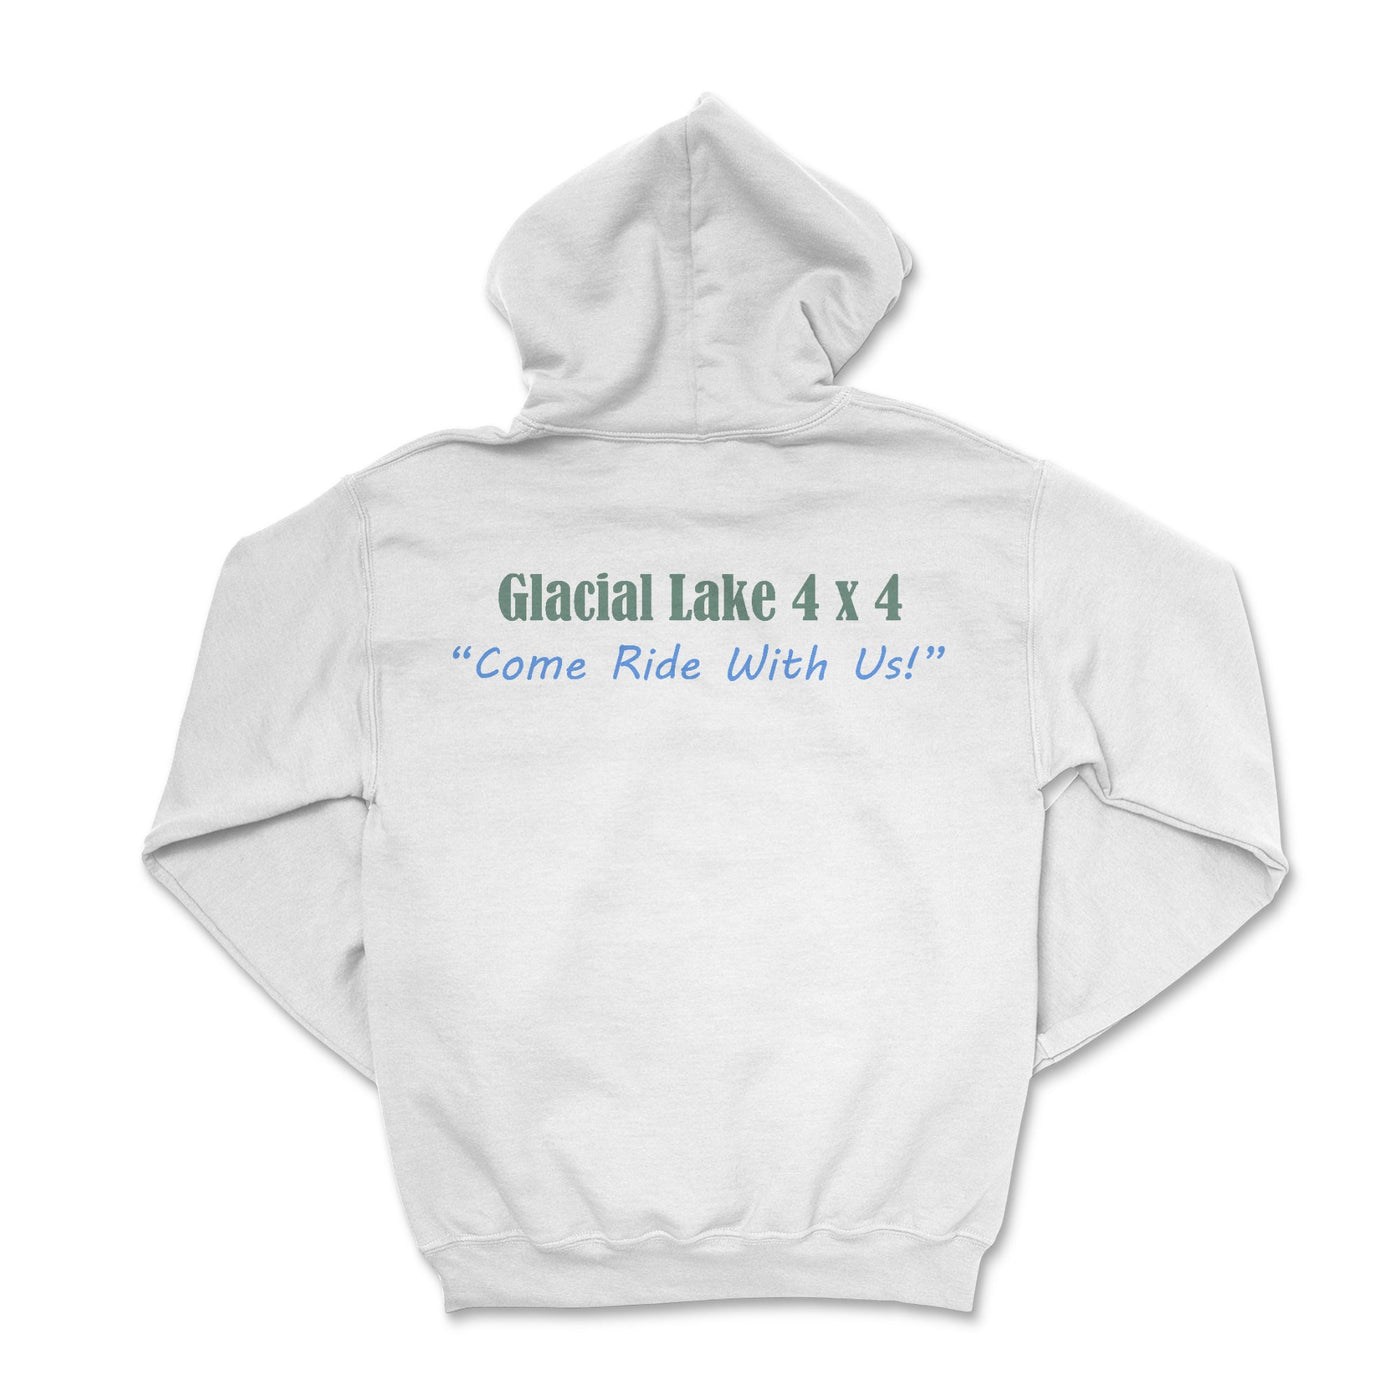 Glacial Lake Club 4x4 Offroad Hoodie - Goats Trail Off-Road Apparel Company